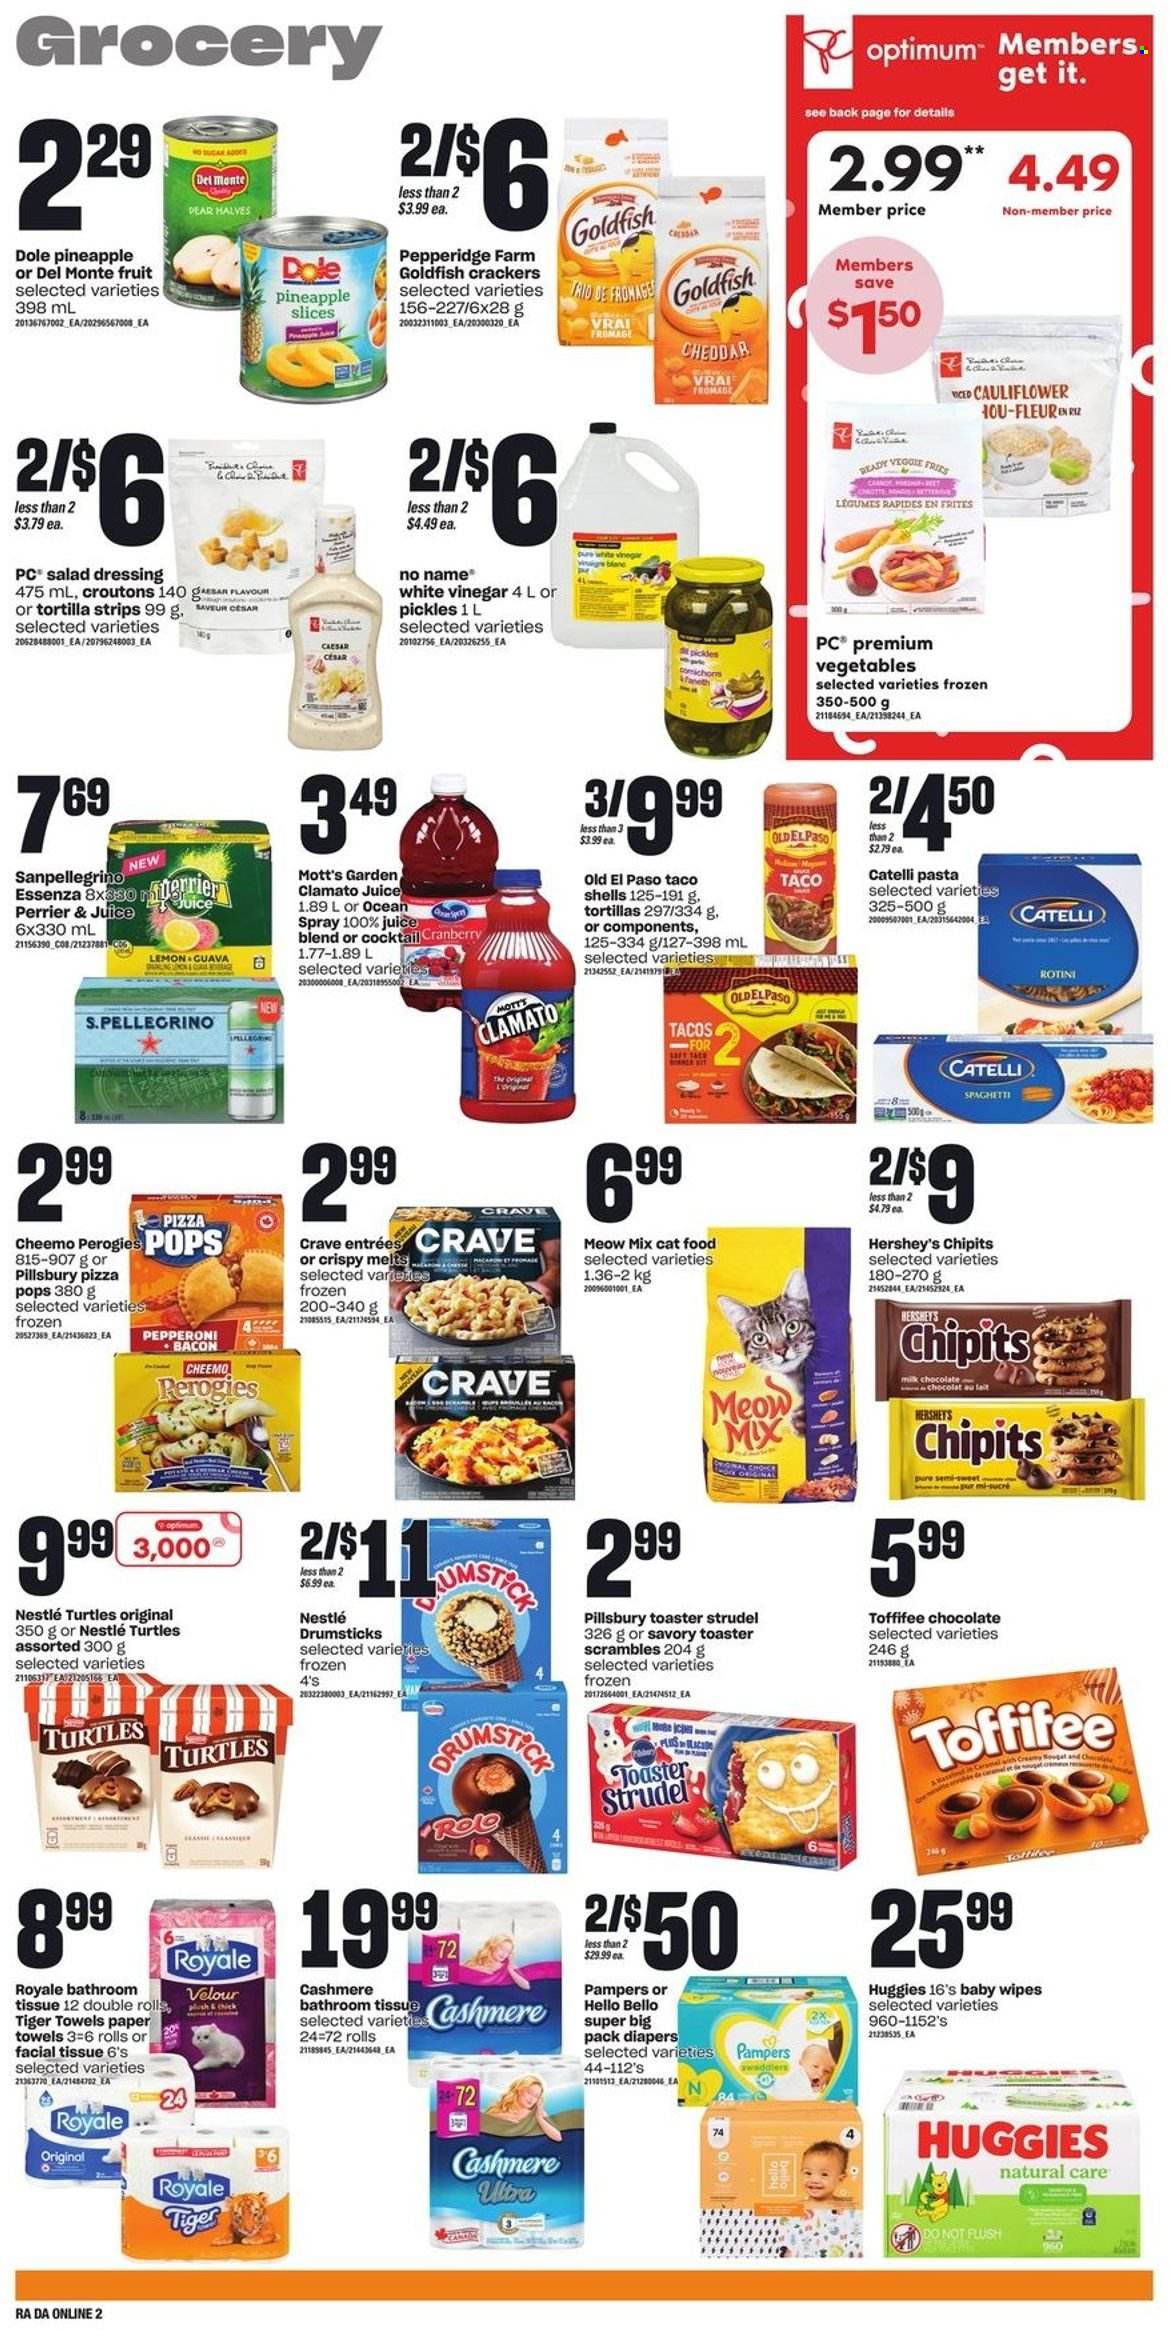 thumbnail - Atlantic Superstore Flyer - November 24, 2022 - November 30, 2022 - Sales products - tortillas, strudel, Old El Paso, tacos, Dole, guava, Mott's, No Name, spaghetti, pizza, pasta, Pillsbury, bacon, pepperoni, Hershey's, milk chocolate, chocolate, crackers, Goldfish, croutons, pickles, Del Monte, salad dressing, dressing, vinegar, juice, Clamato, Perrier, San Pellegrino, wipes, baby wipes, nappies, bath tissue, kitchen towels, paper towels, animal food, turtles, cat food, Optimum, Meow Mix, Nestlé, Huggies, Pampers, nougat. Page 8.